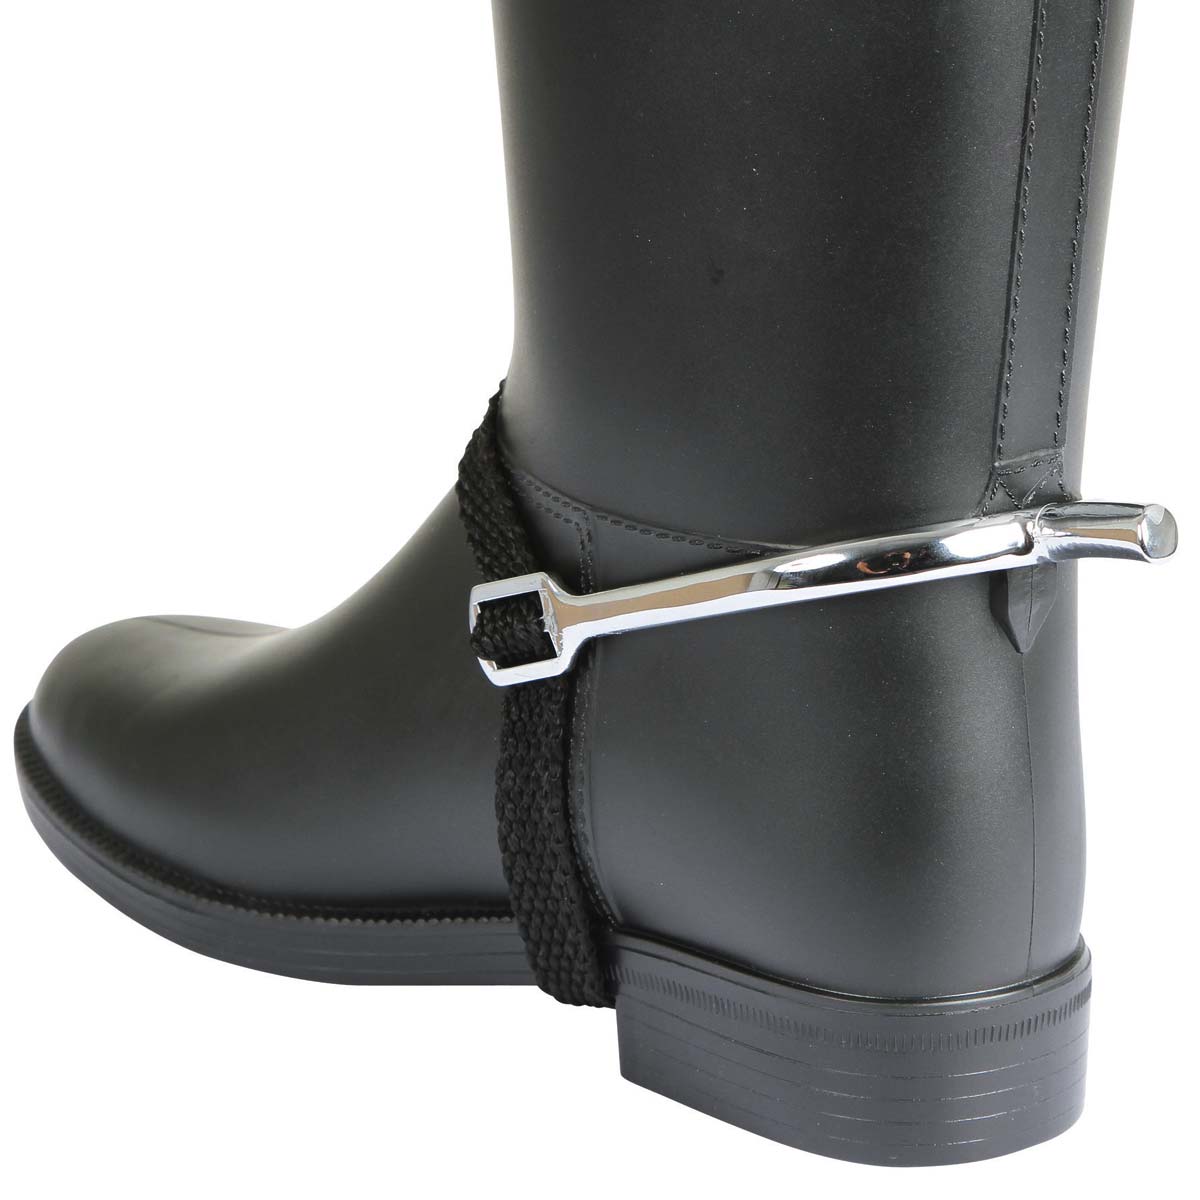 Covalliero spurs ball with straps for men 30 mm